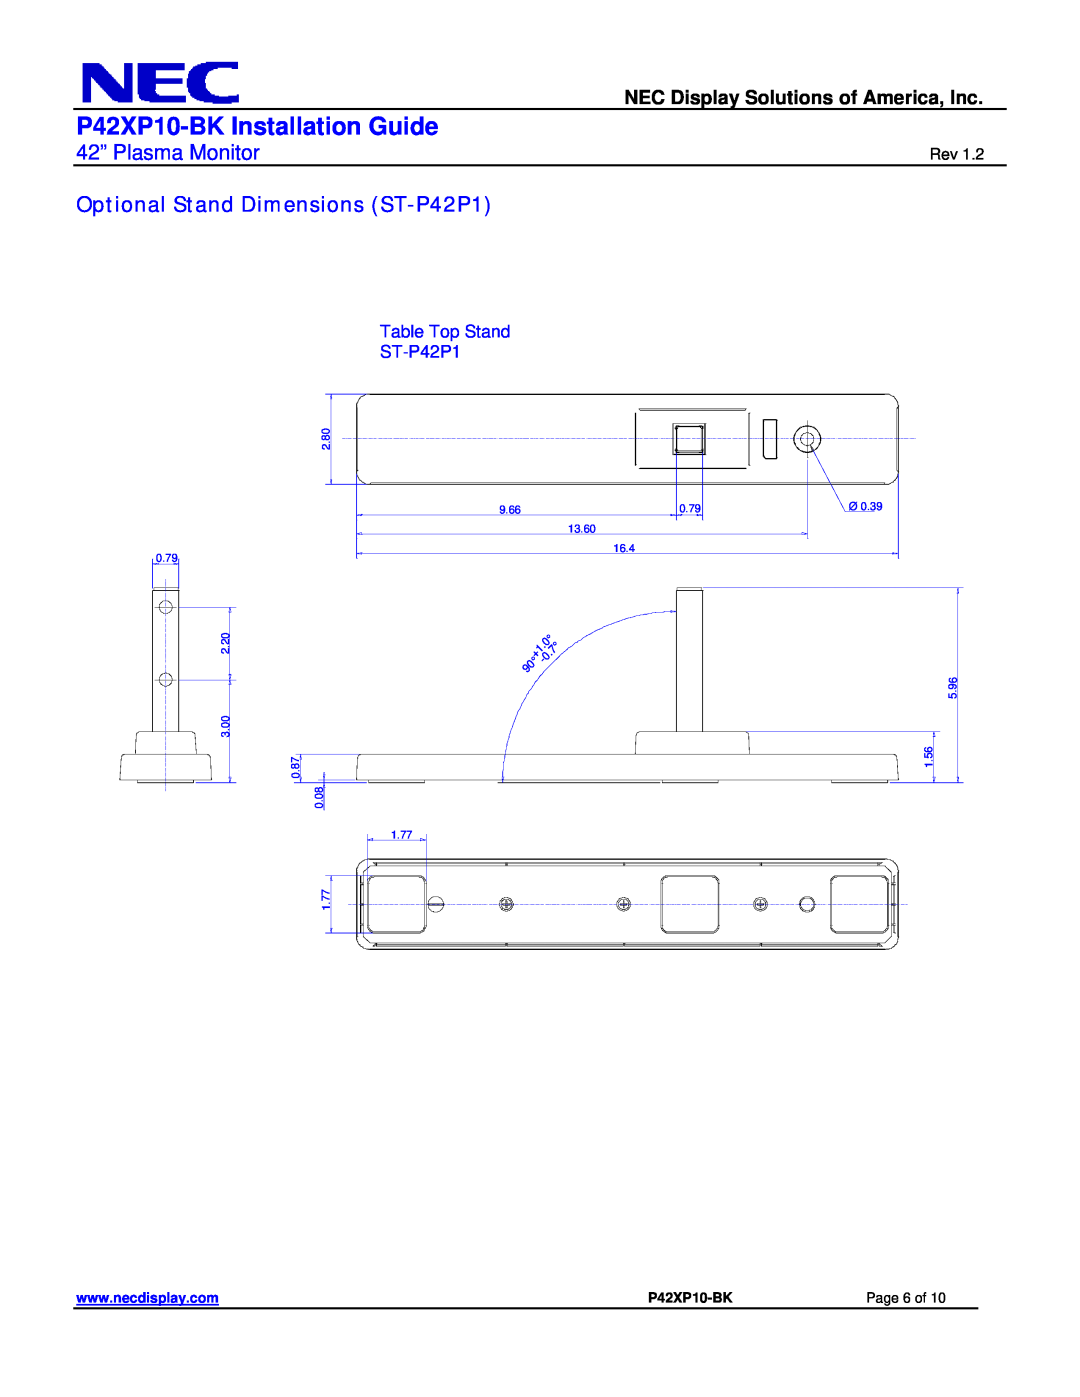 NEC Optional Stand Dimensions ST-P42P1, Table Top Stand, P42XP10-BK Installation Guide, 42” Plasma Monitor, Page 6 of 